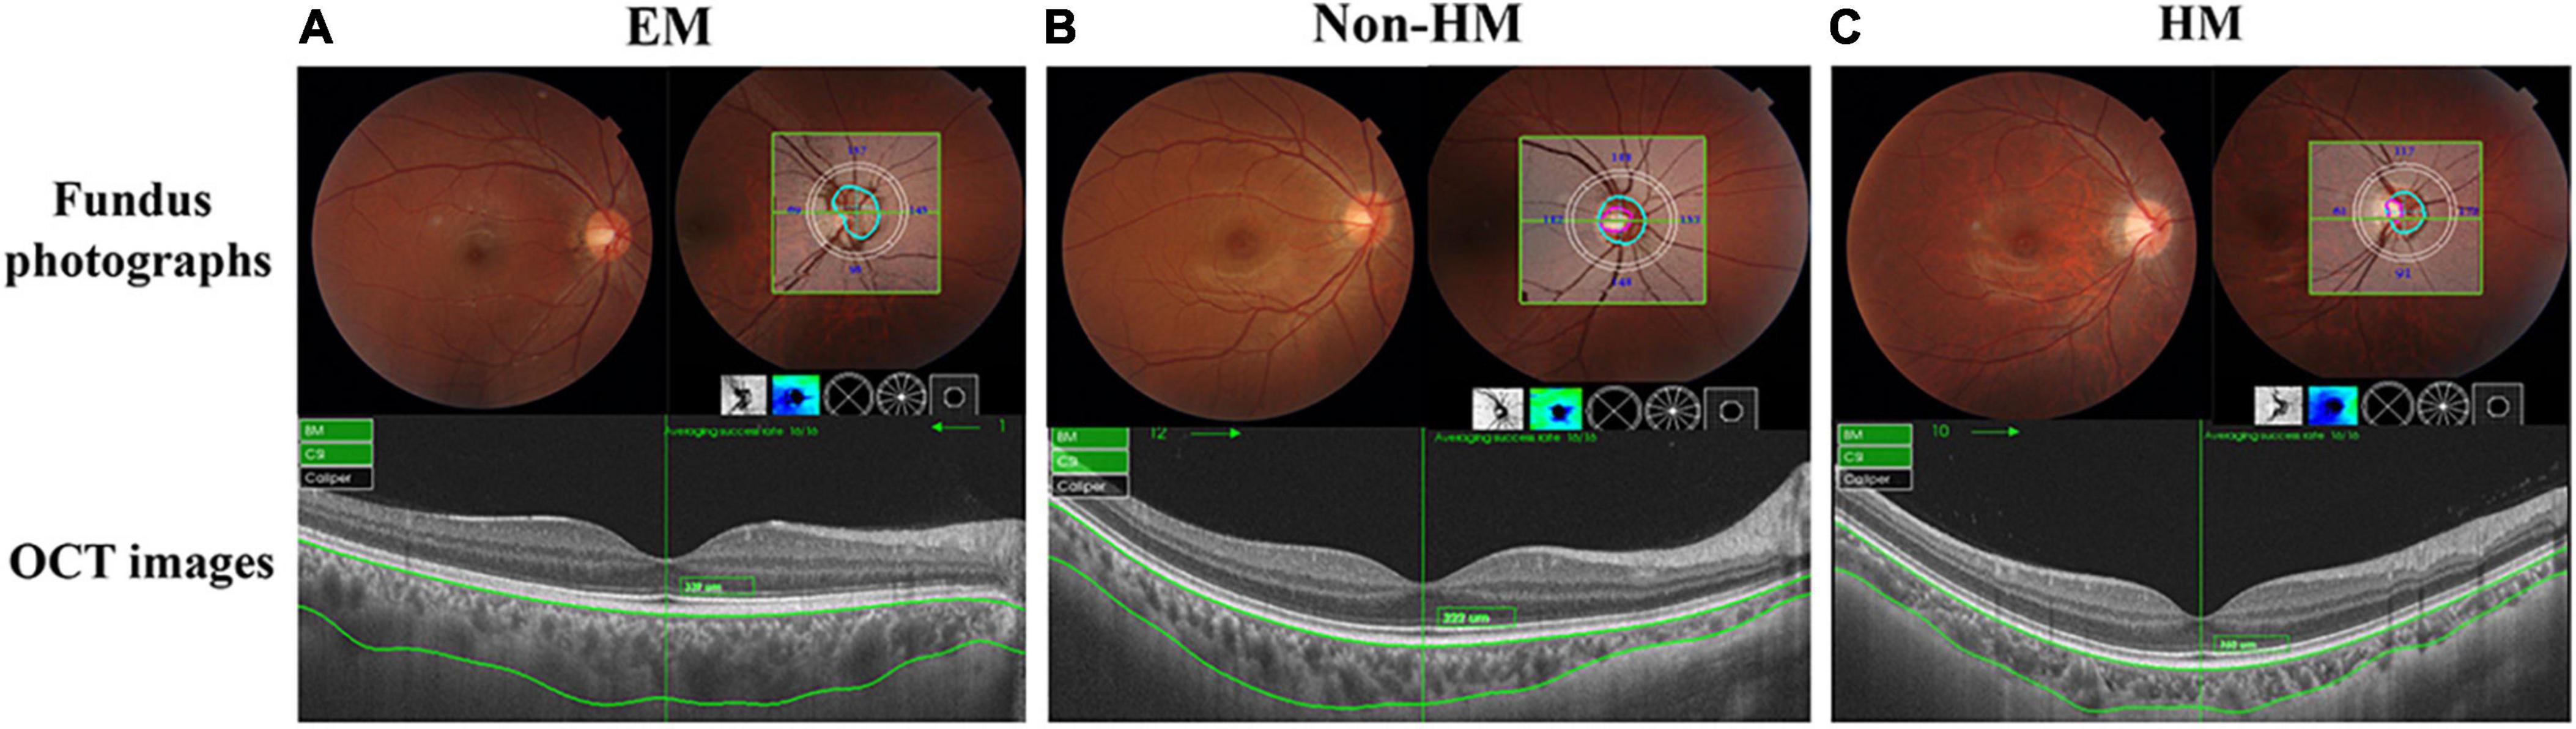 EFEMP1 is a potential biomarker of choroid thickness change in myopia